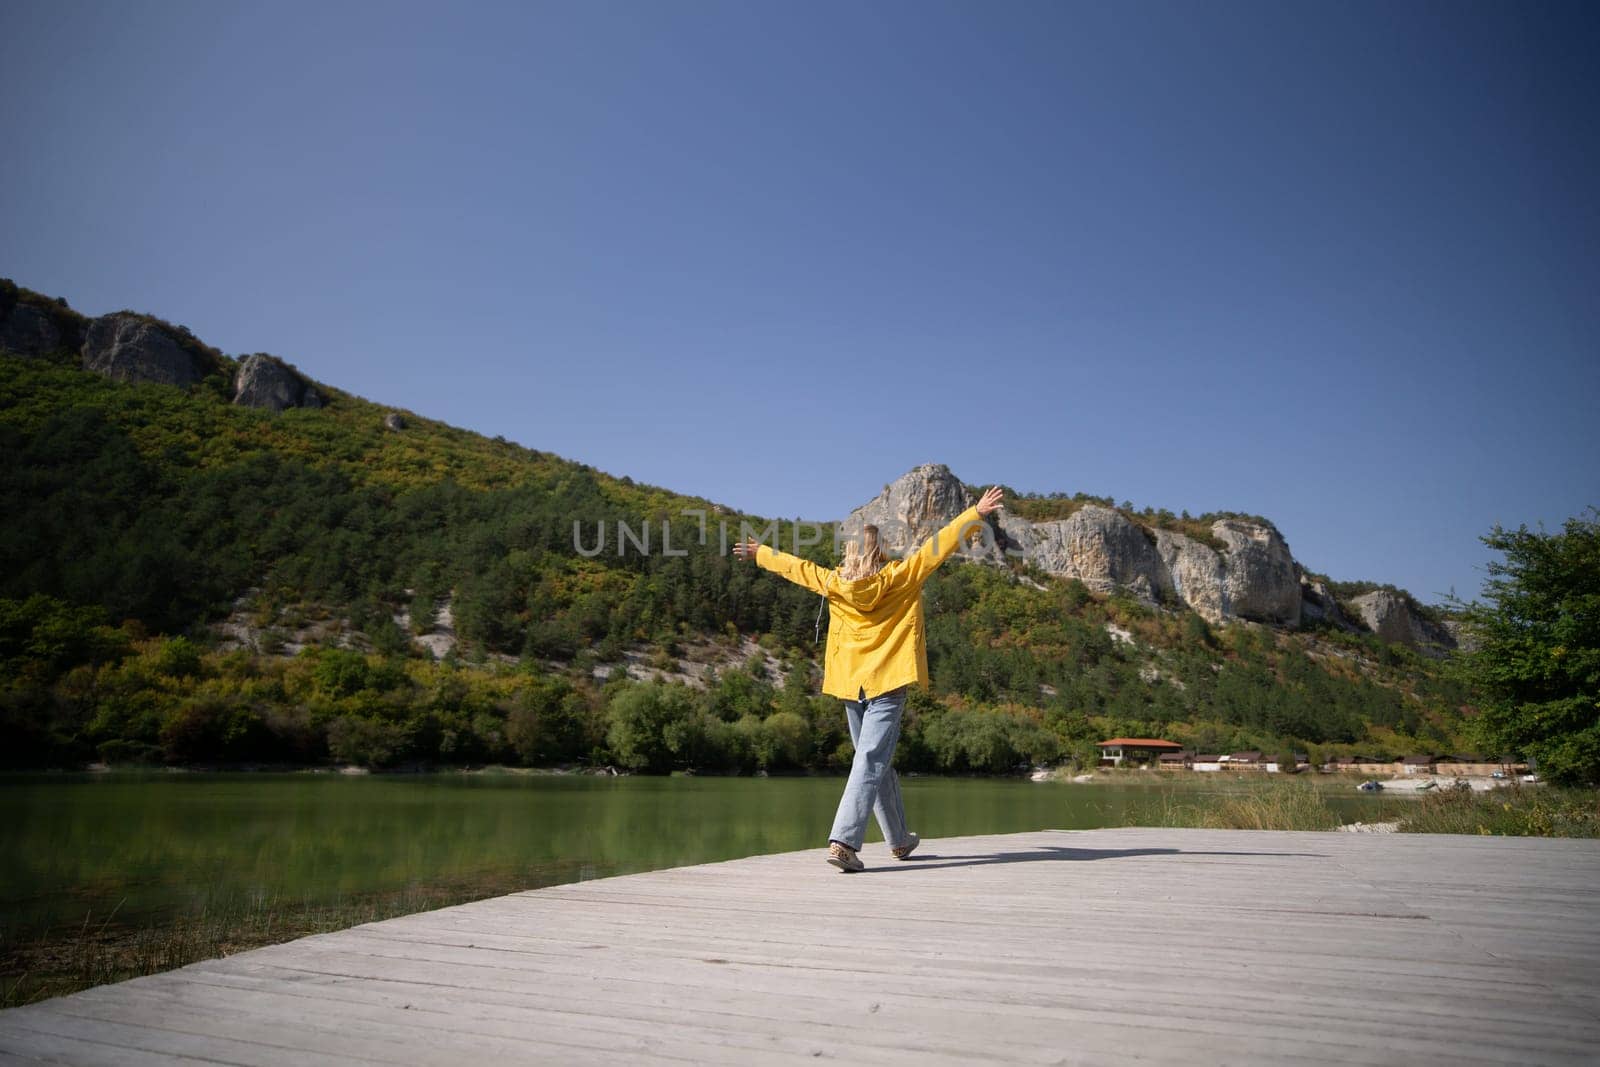 A woman in a yellow jacket is walking on a wooden boardwalk near a lake. The sky is clear and the mountains in the background create a serene and peaceful atmosphere